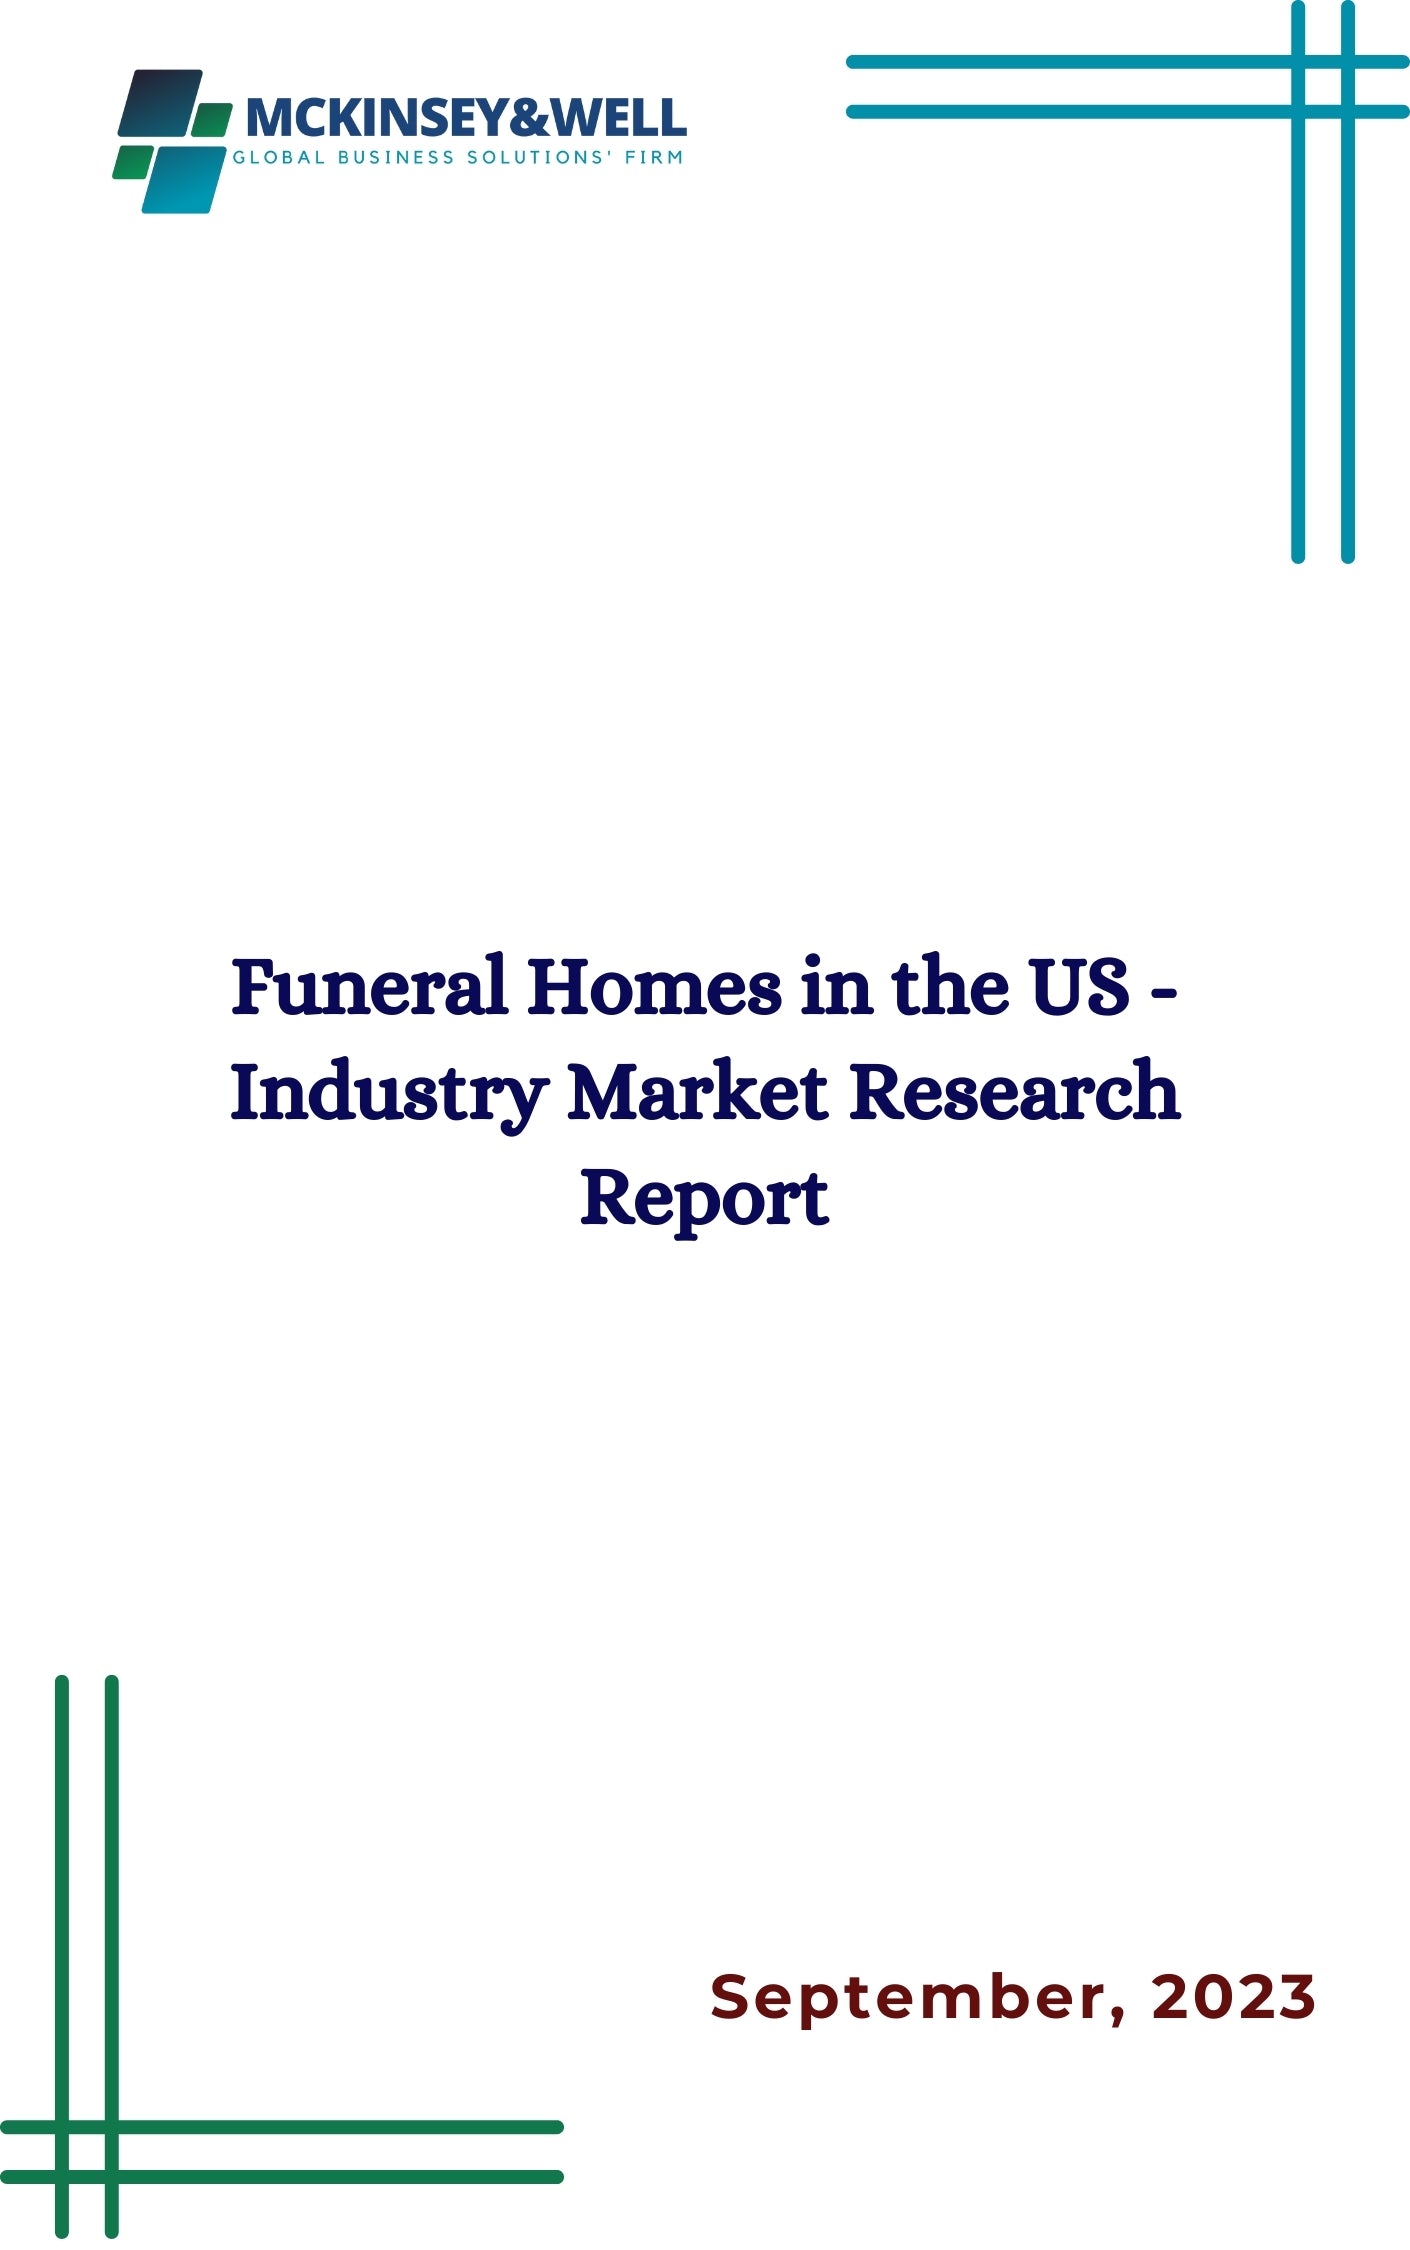 Funeral Homes in the US - Industry Market Research Report